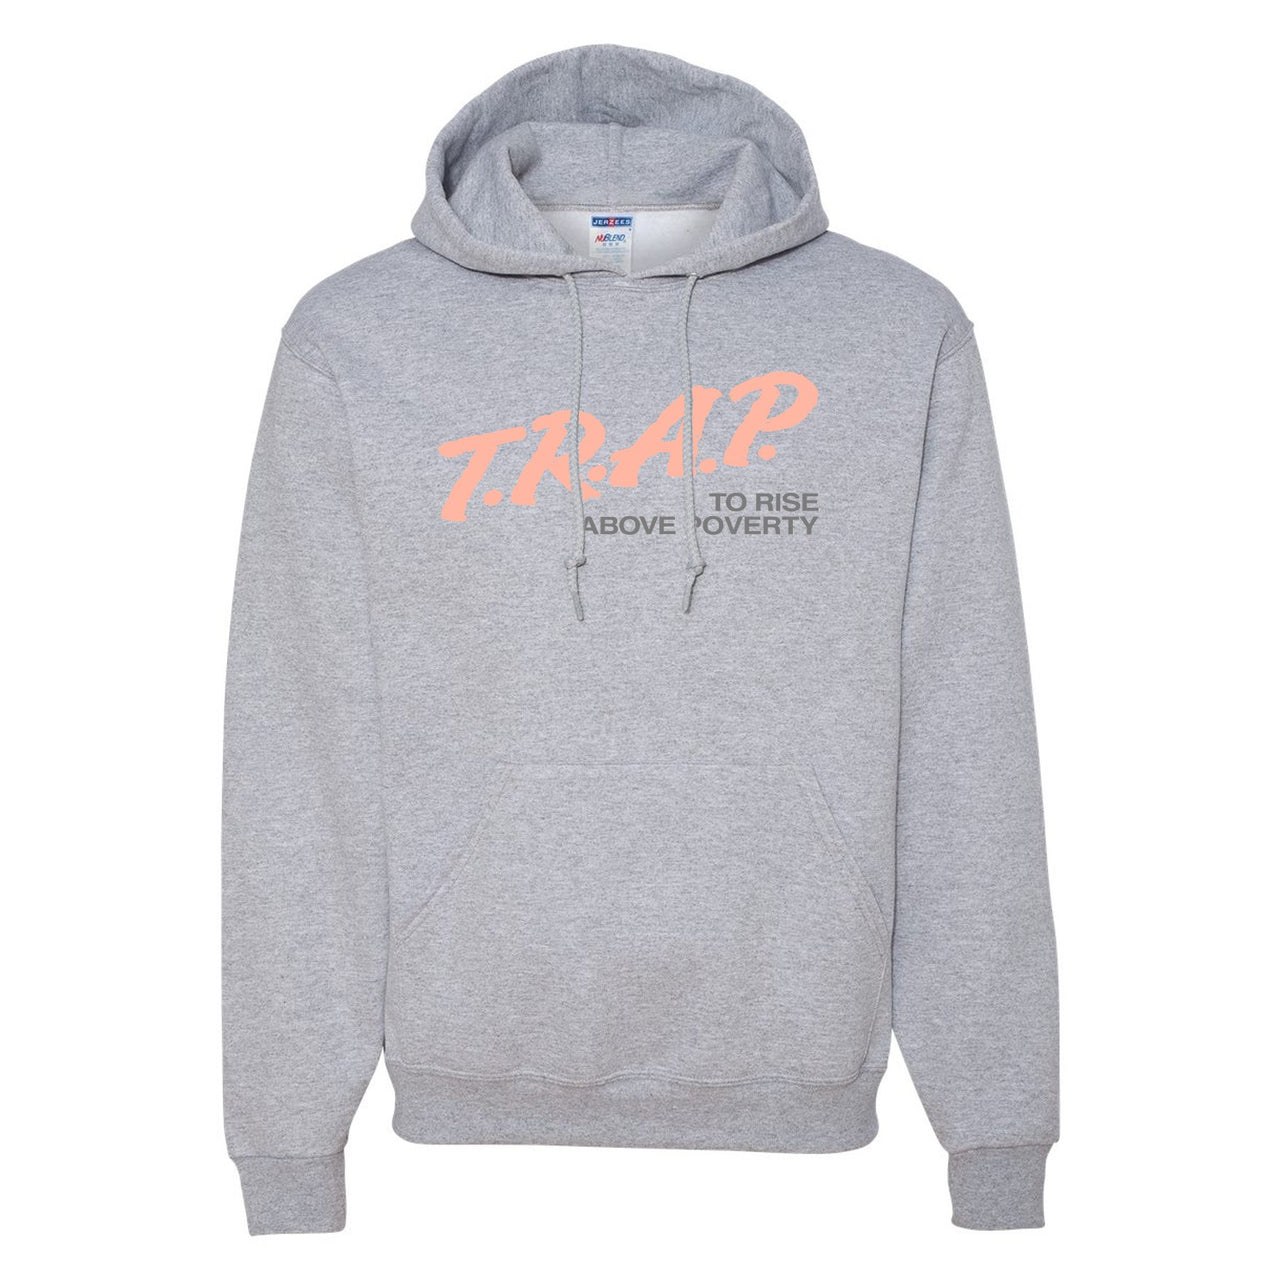 True Form v2 350s Hoodie | Trap To Rise Above Poverty, Heathered Light Gray